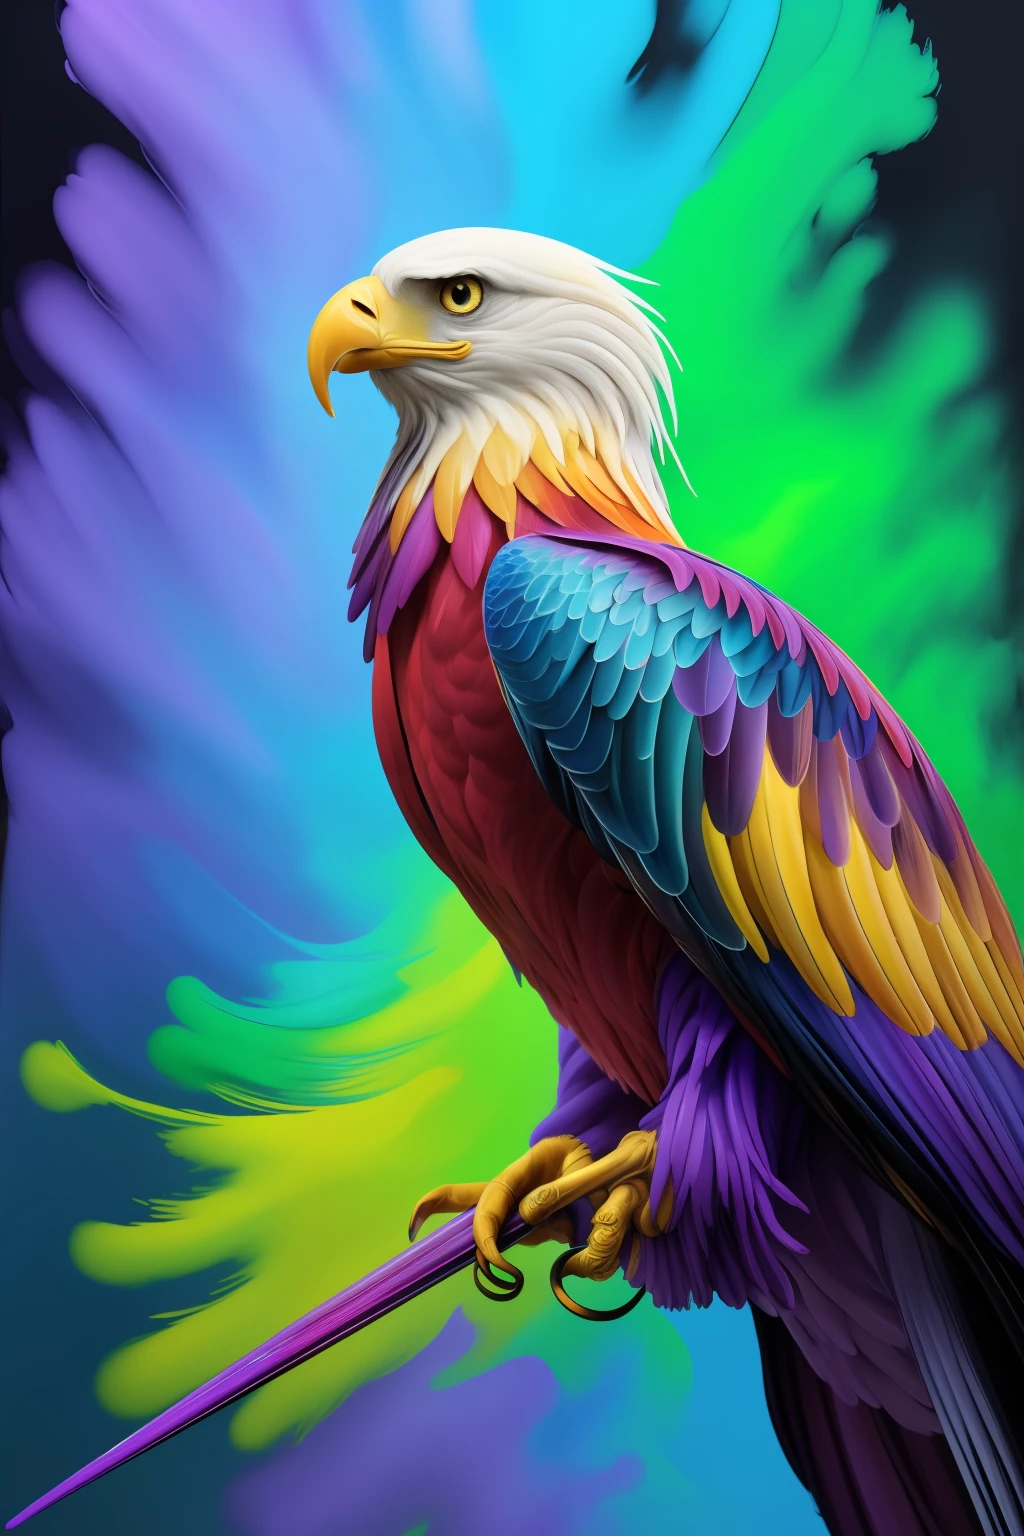 Colorful Eagle: A 28-year-old Giru, oil painting, perfect feathers, blue yellow colors, light purple and violet additions, light red additions, intricate details, welcome screen, 8k resolution, masterpiece, artstation digital painting Very smooth ink flow: 8k resolution Photorealistic masterpiece: Intricately detailed fluid gouache painting: by Jean Baptiste Mongue:  Calligraphy: Acrylic: Watercolor Art, Professional Photography, Daylighting, Maximalist Volumetric Lighting Photoillustration: by Marton Bobzert:, Complex, Elegant, Expansive, Fantastic, Vibrant, Best Quality Details, Realistic, High Definition, High Quality Texture, Epic Lighting, Motion Picture Still, 8k, Soft Lighting, Anime Style, Masterful Playing Card Edge, Random Colorful Art, Oil Painting, Blue Yellow Colors, Purple Color Additions  clear and violet, light red additions, intricate details, welcome screen, 8K resolution, masterpiece, artstation digital painting Very smooth Black ink flow: 8K resolution Photorealistic masterpiece: intricately detailed fluid gouache painting: by Jean Baptiste Mongue: Calligraphy: acrylic: watercolor art, professional photography, natural lighting, volumetric lighting Maximalist photoillustration: by Marton Bobzert:, complex,  Elegant, expansive, fantastic, vibrant